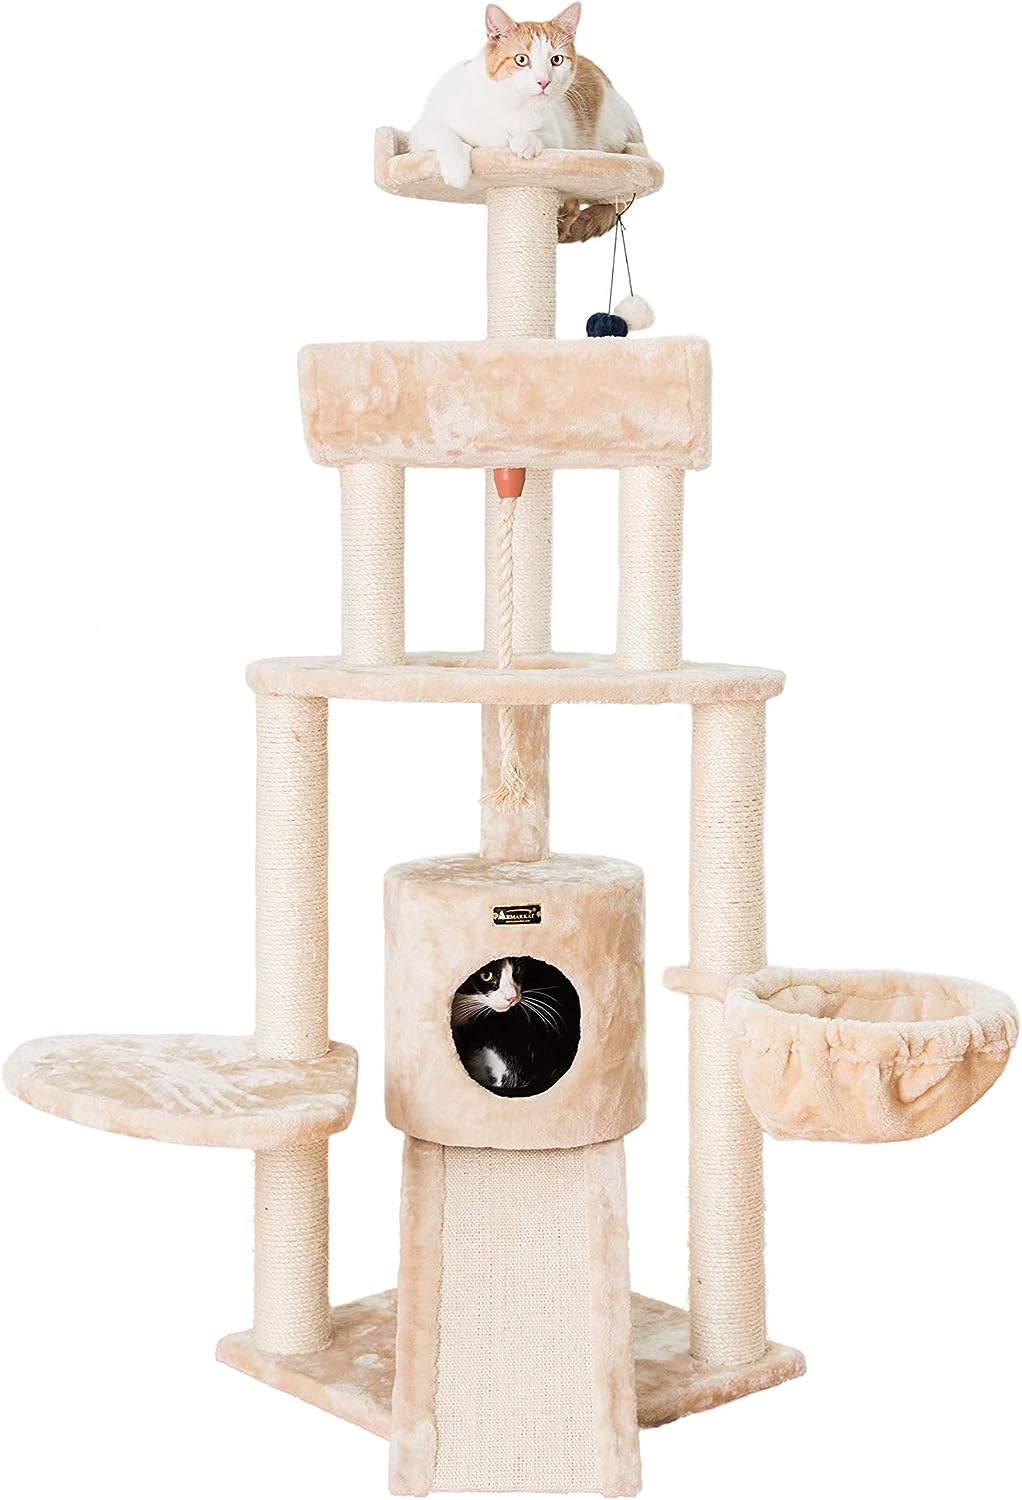 Armarkat 58-in tower ramp cat tree classic real wood 